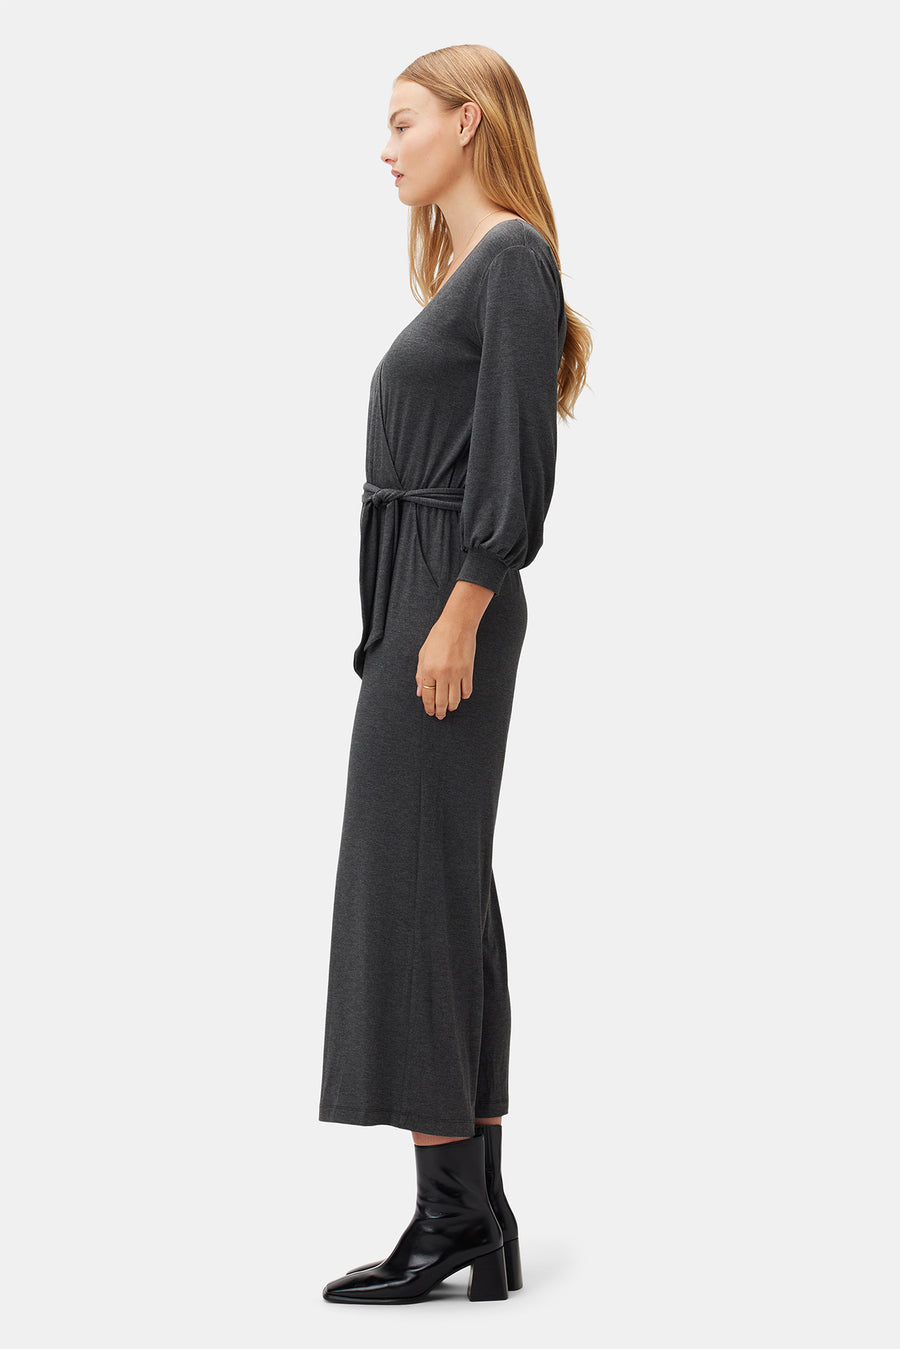 Everley Modal Jumpsuit - Anthracite